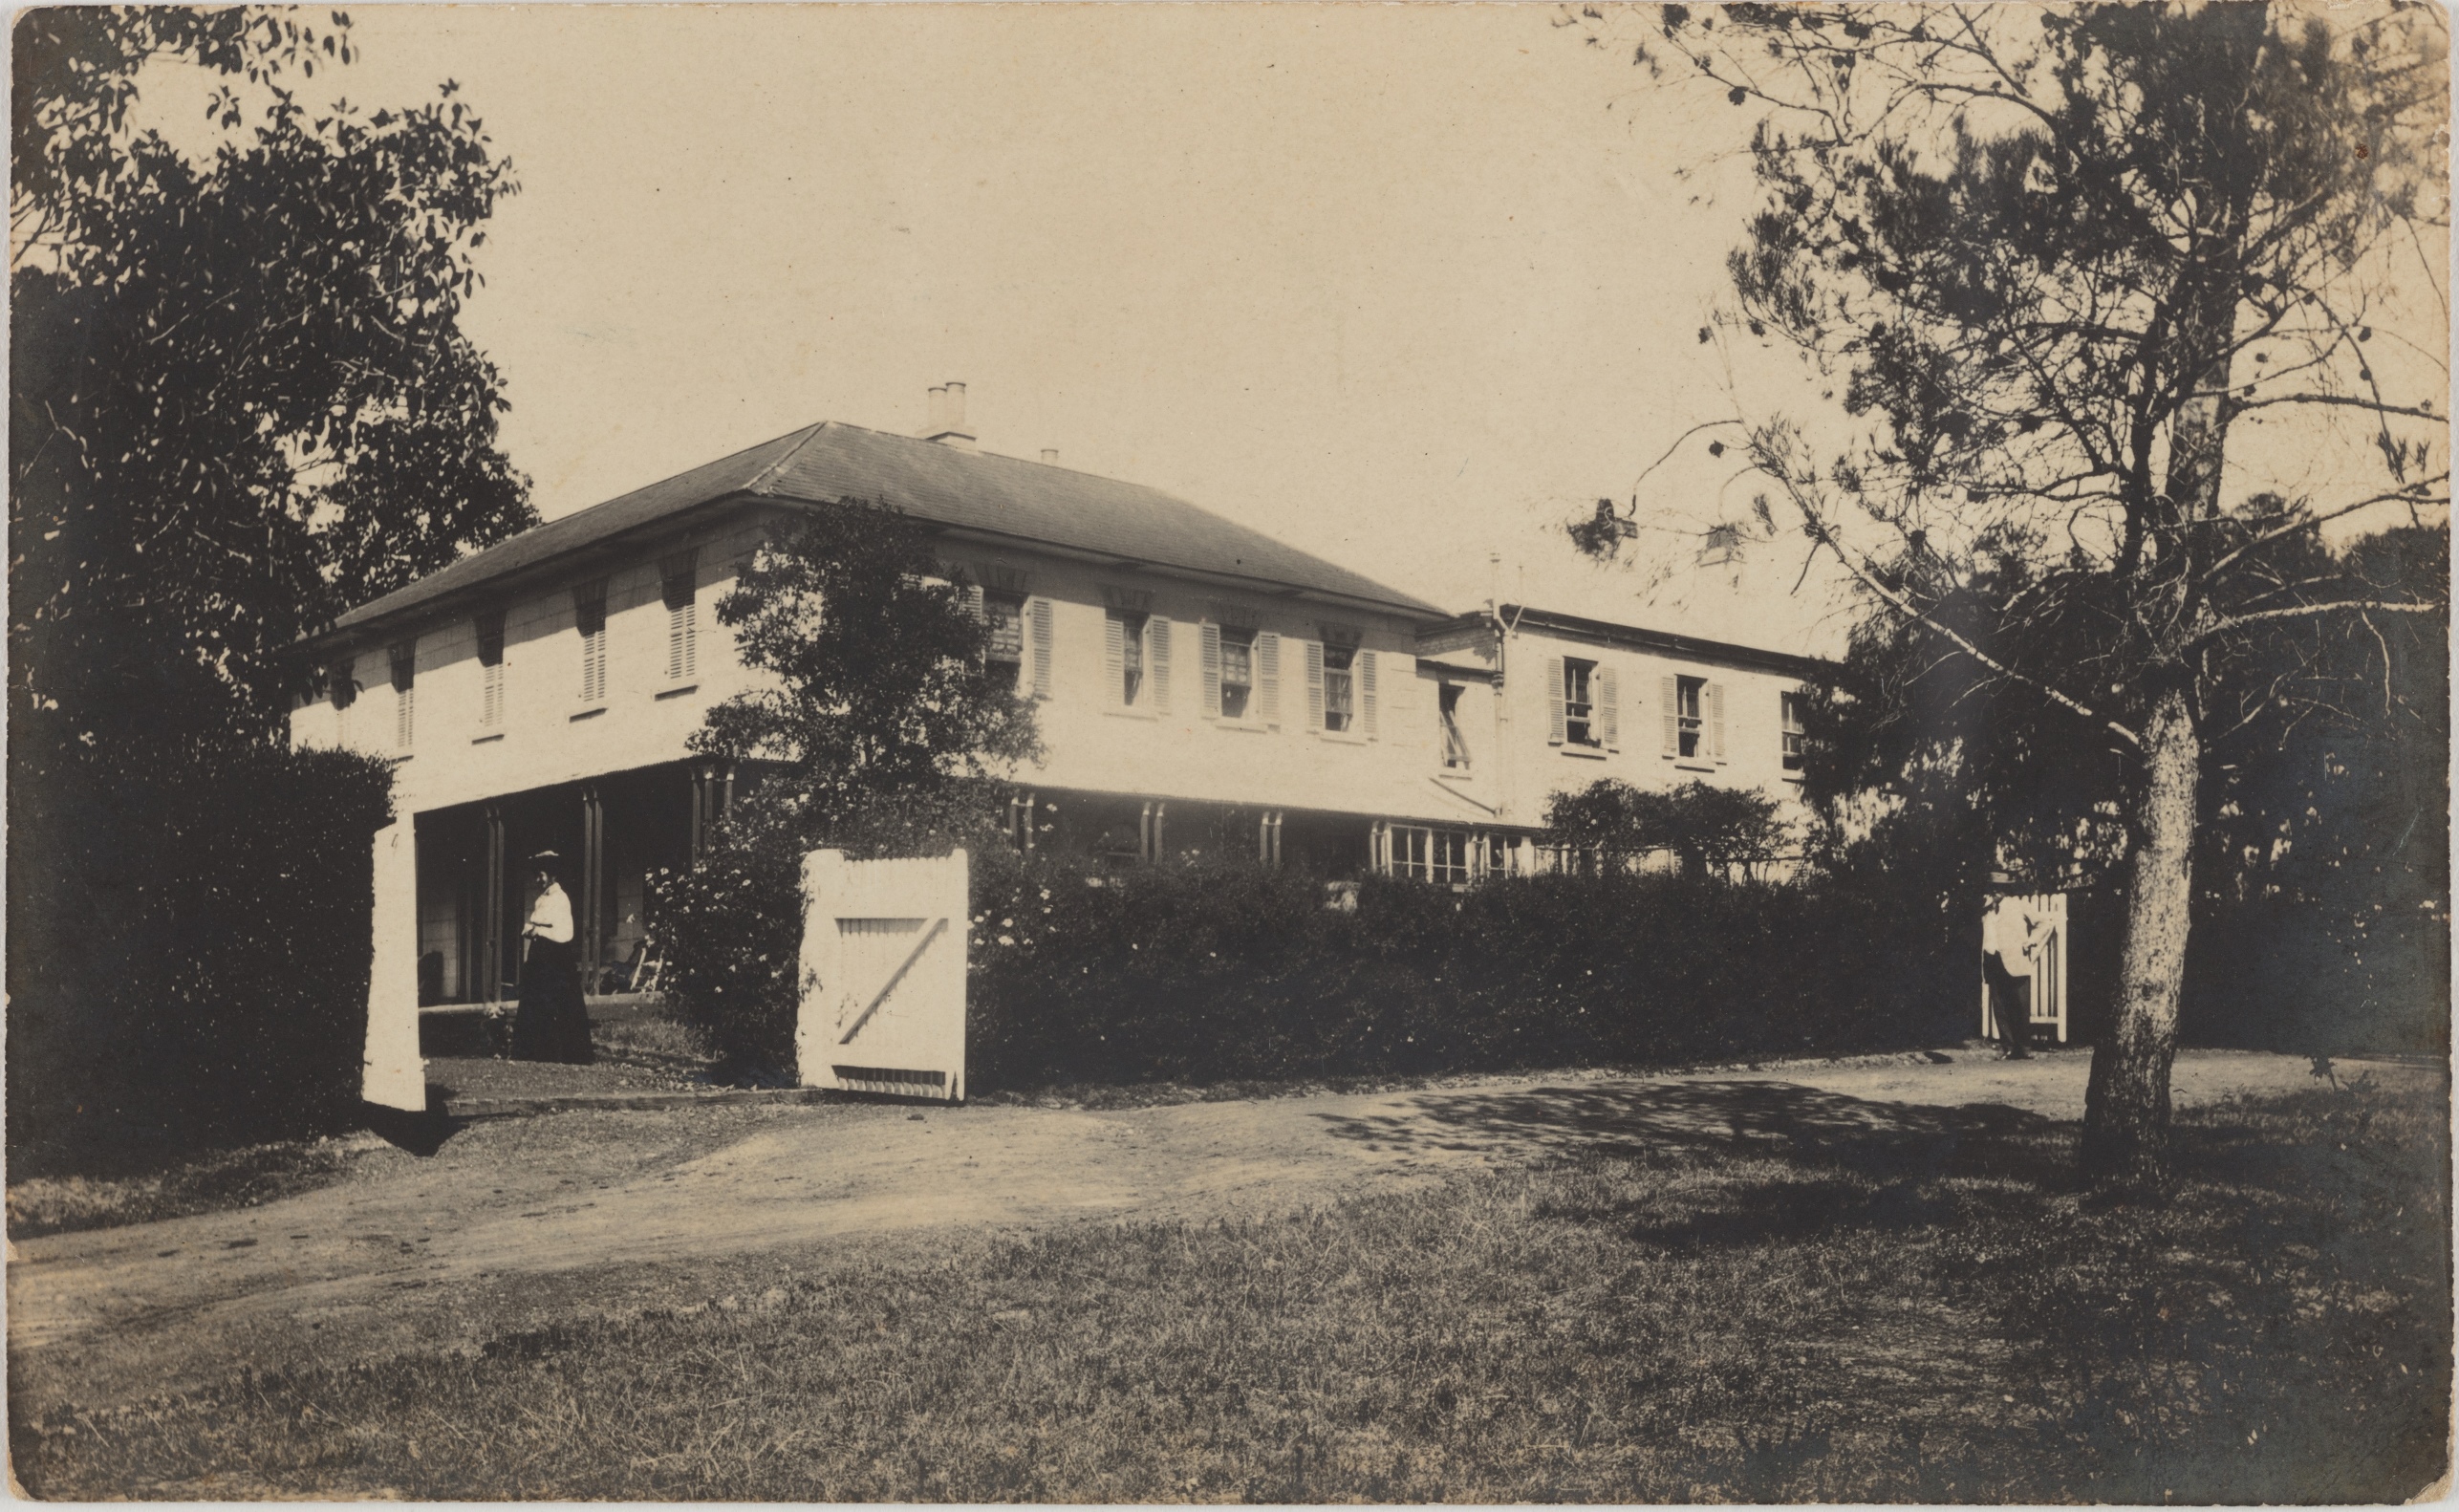 View of the west side of Rouse Hill House, from the drive through the double carriage gates to the carriage circle and front verandah of Rouse Hill House, around 1908 / photographer unknown